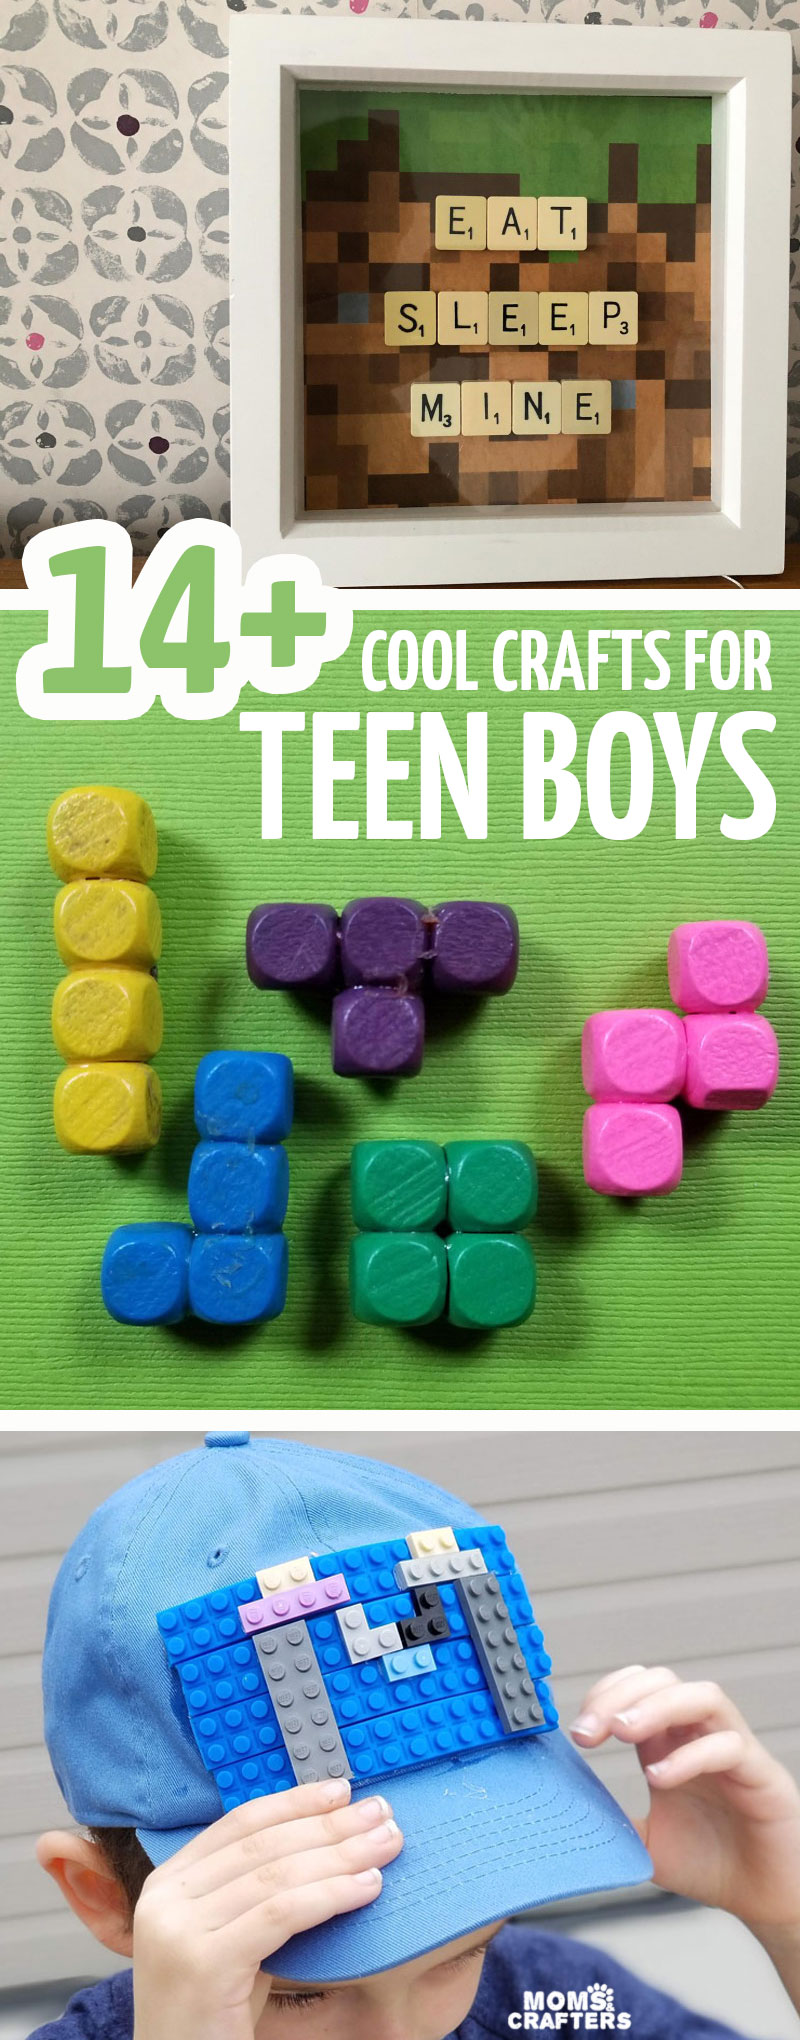 Click for 14+ amazingly cool crafts for teen boys - including LEGO and minecraft themes, superhero crafts, and more cool ideas for get-togethers and camps!